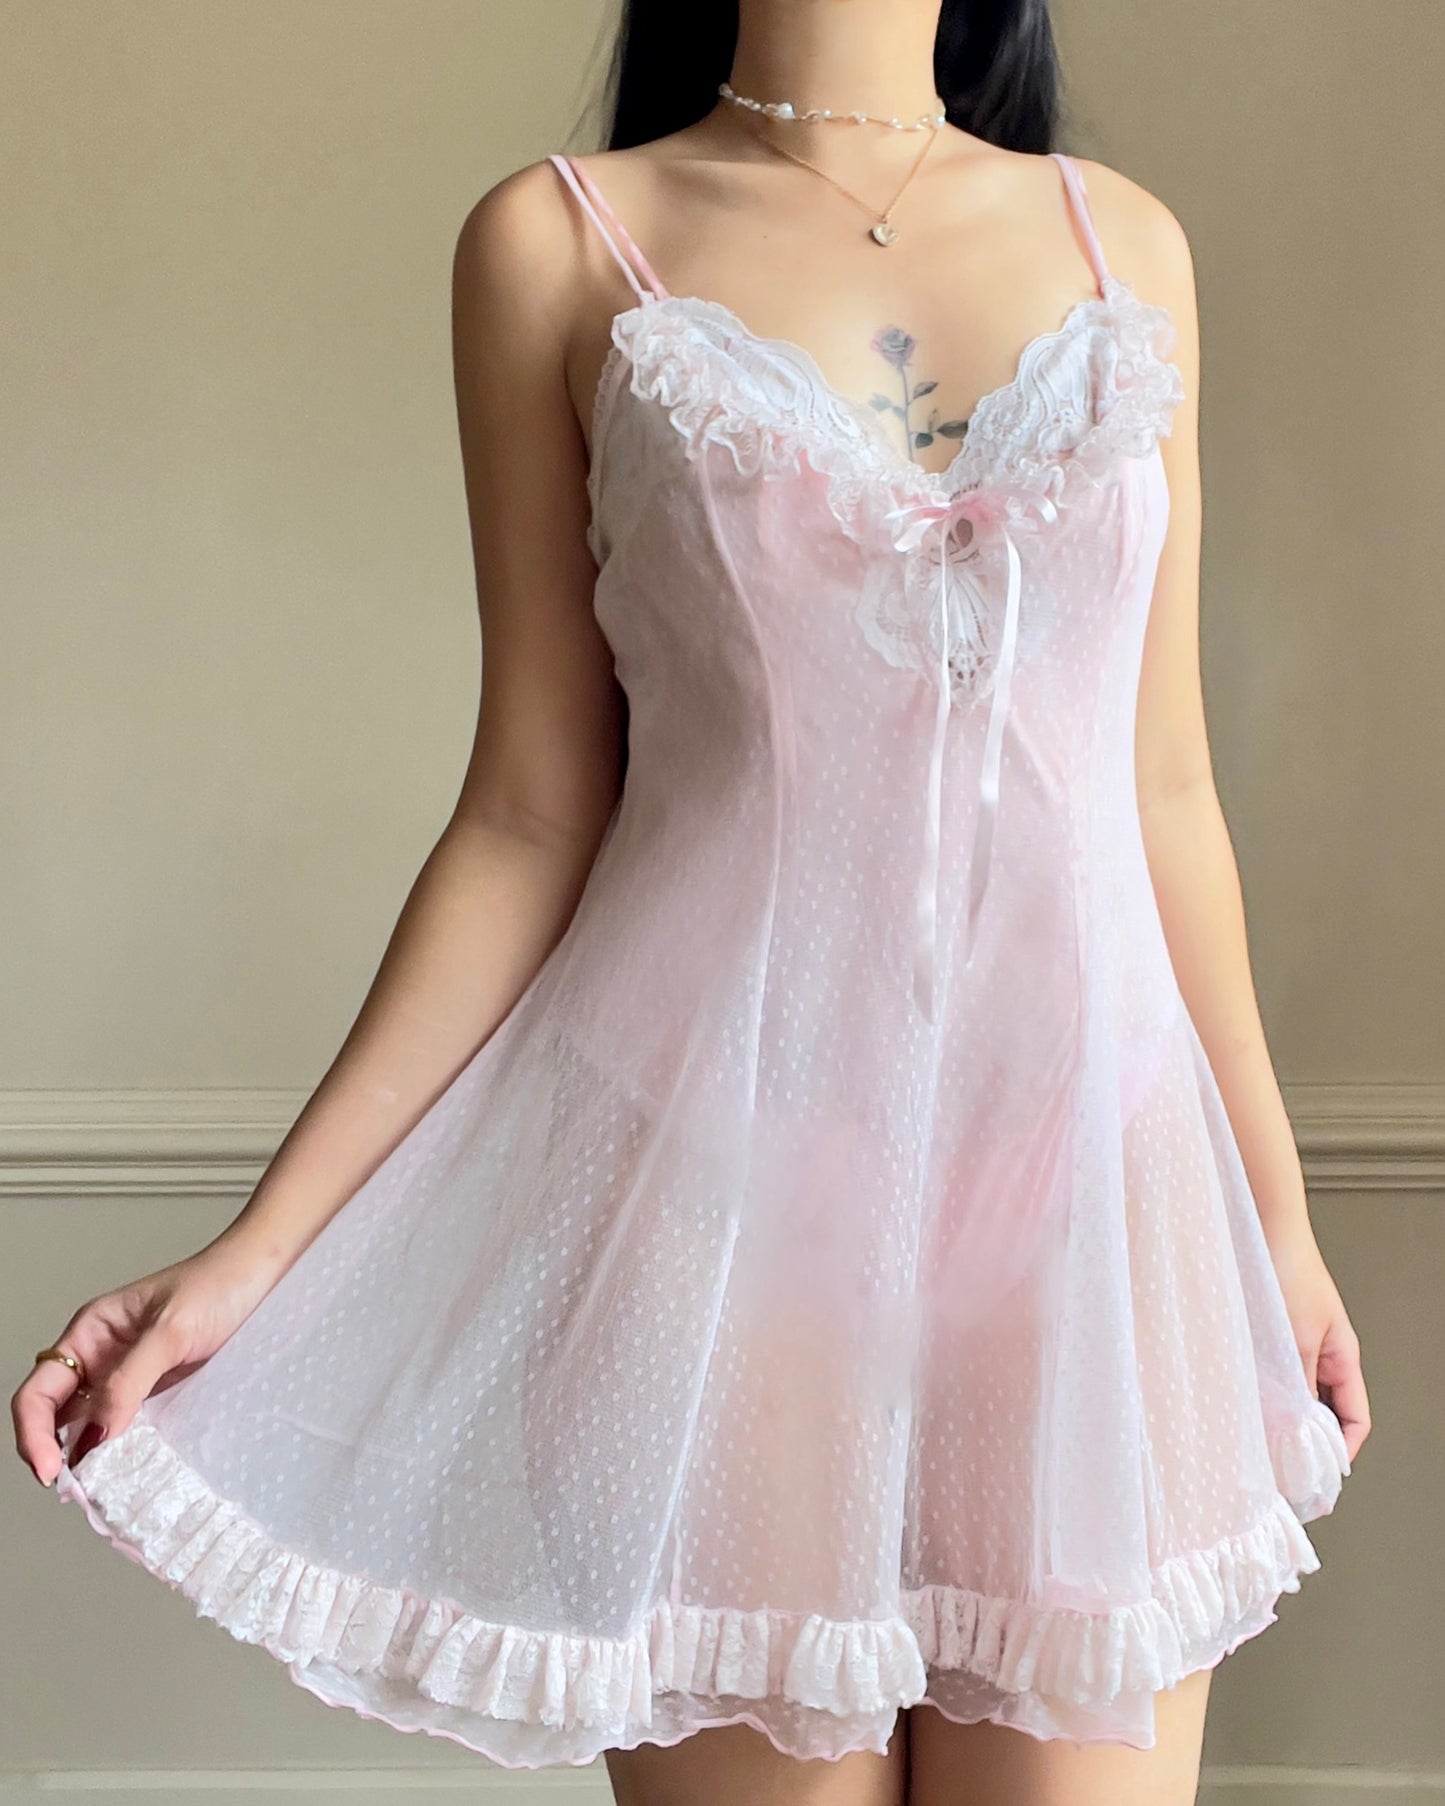 Super Cute Sheer Veil-like Laced Babydoll Slip featuring Adorable Ruffle Trimming